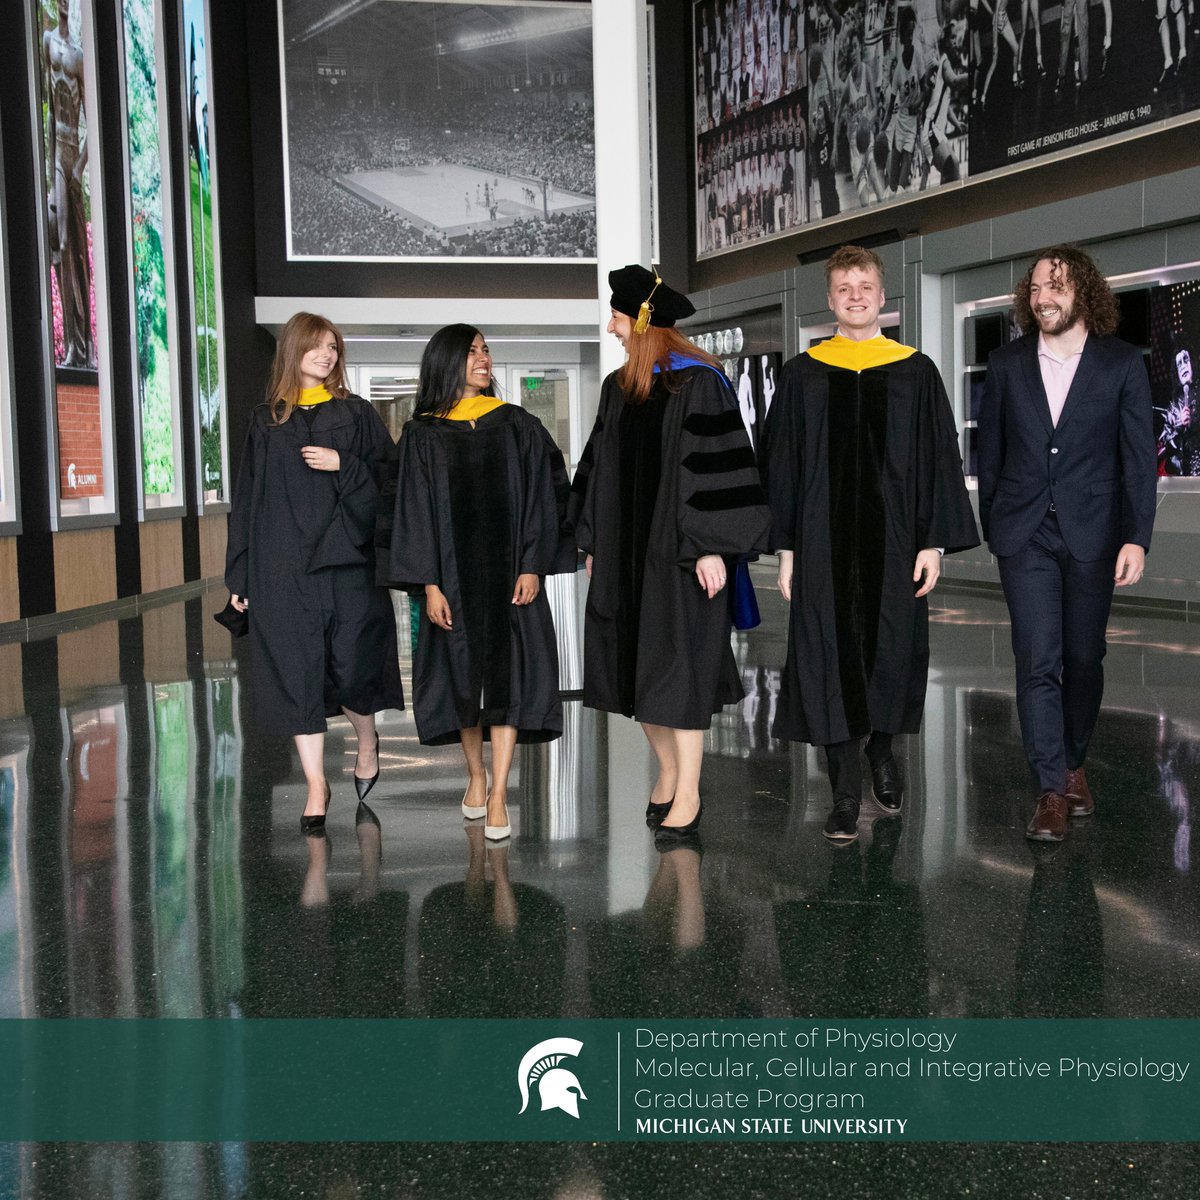 From all of us at the Department of Physiology at MSU, cheers to a wonderful Commencement weekend!

#msupsl #mcip #mcipandme #graduation #physiology #mastersdegree #phd #neuroscience #commencement #msu #spartans #graduationday